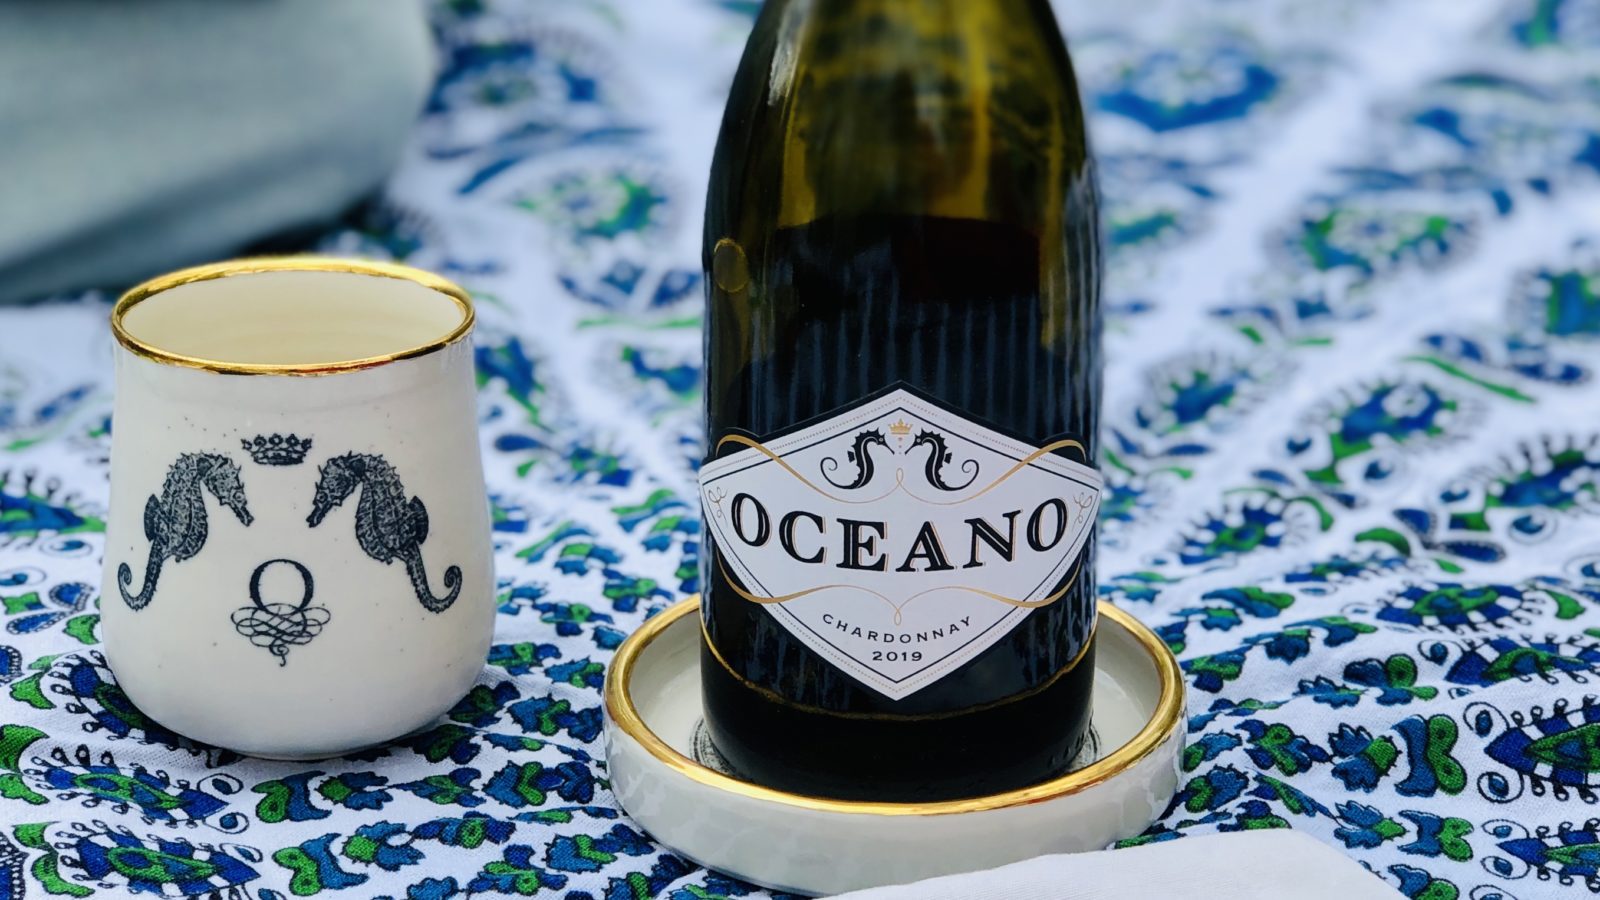 A Pinot Noir Chardonnay from oceano wines